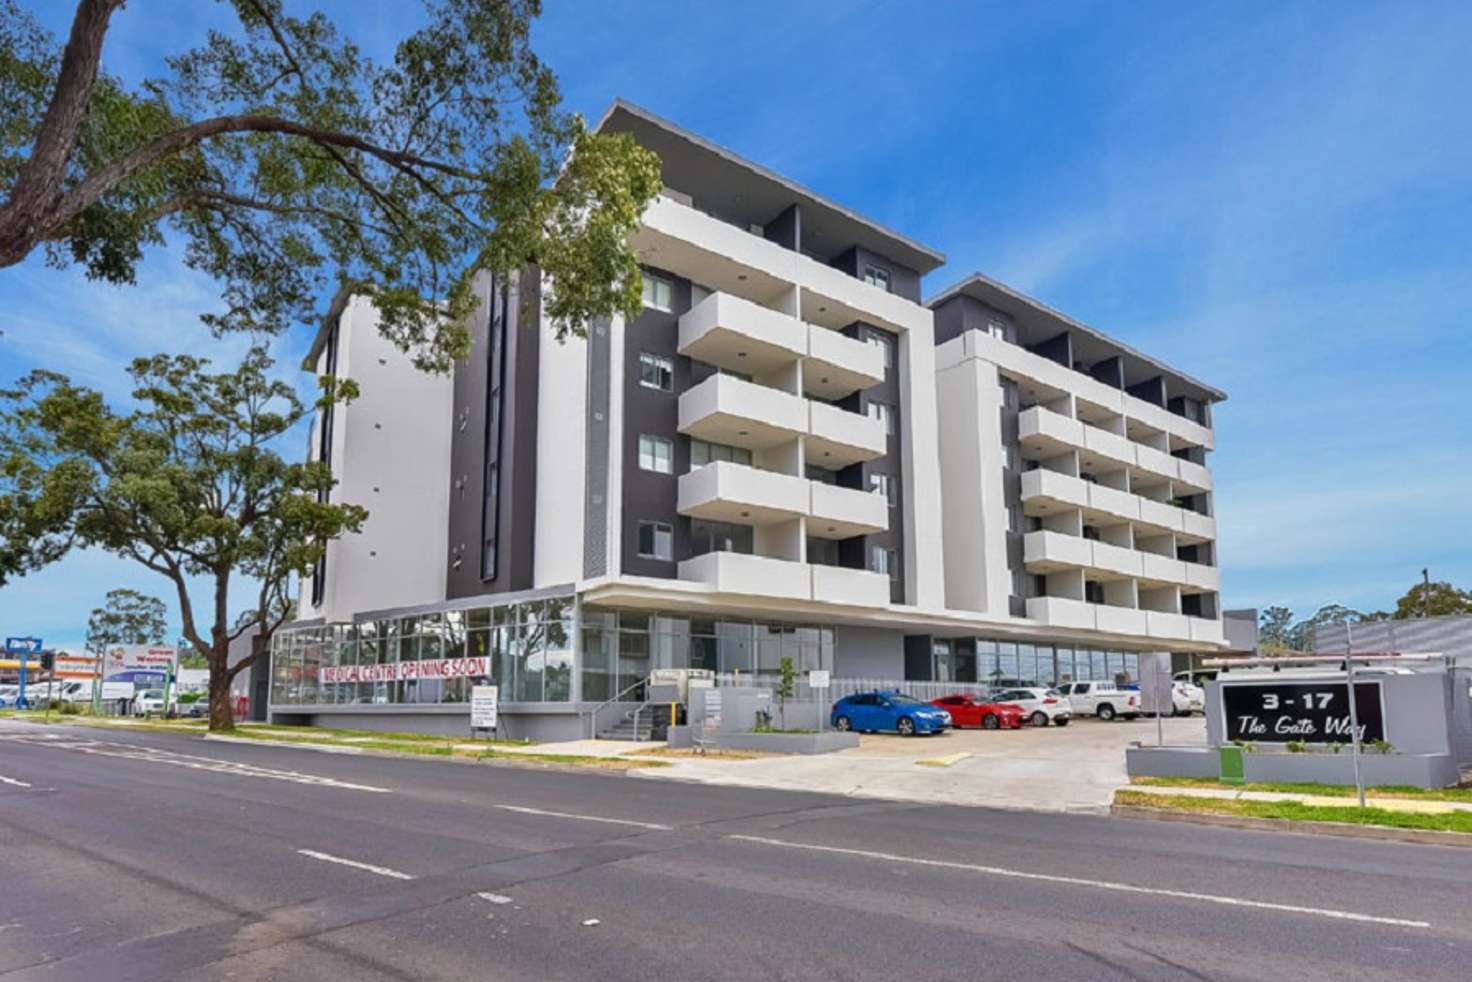 Main view of Homely apartment listing, 44/3-17 Queen Street, Campbelltown NSW 2560